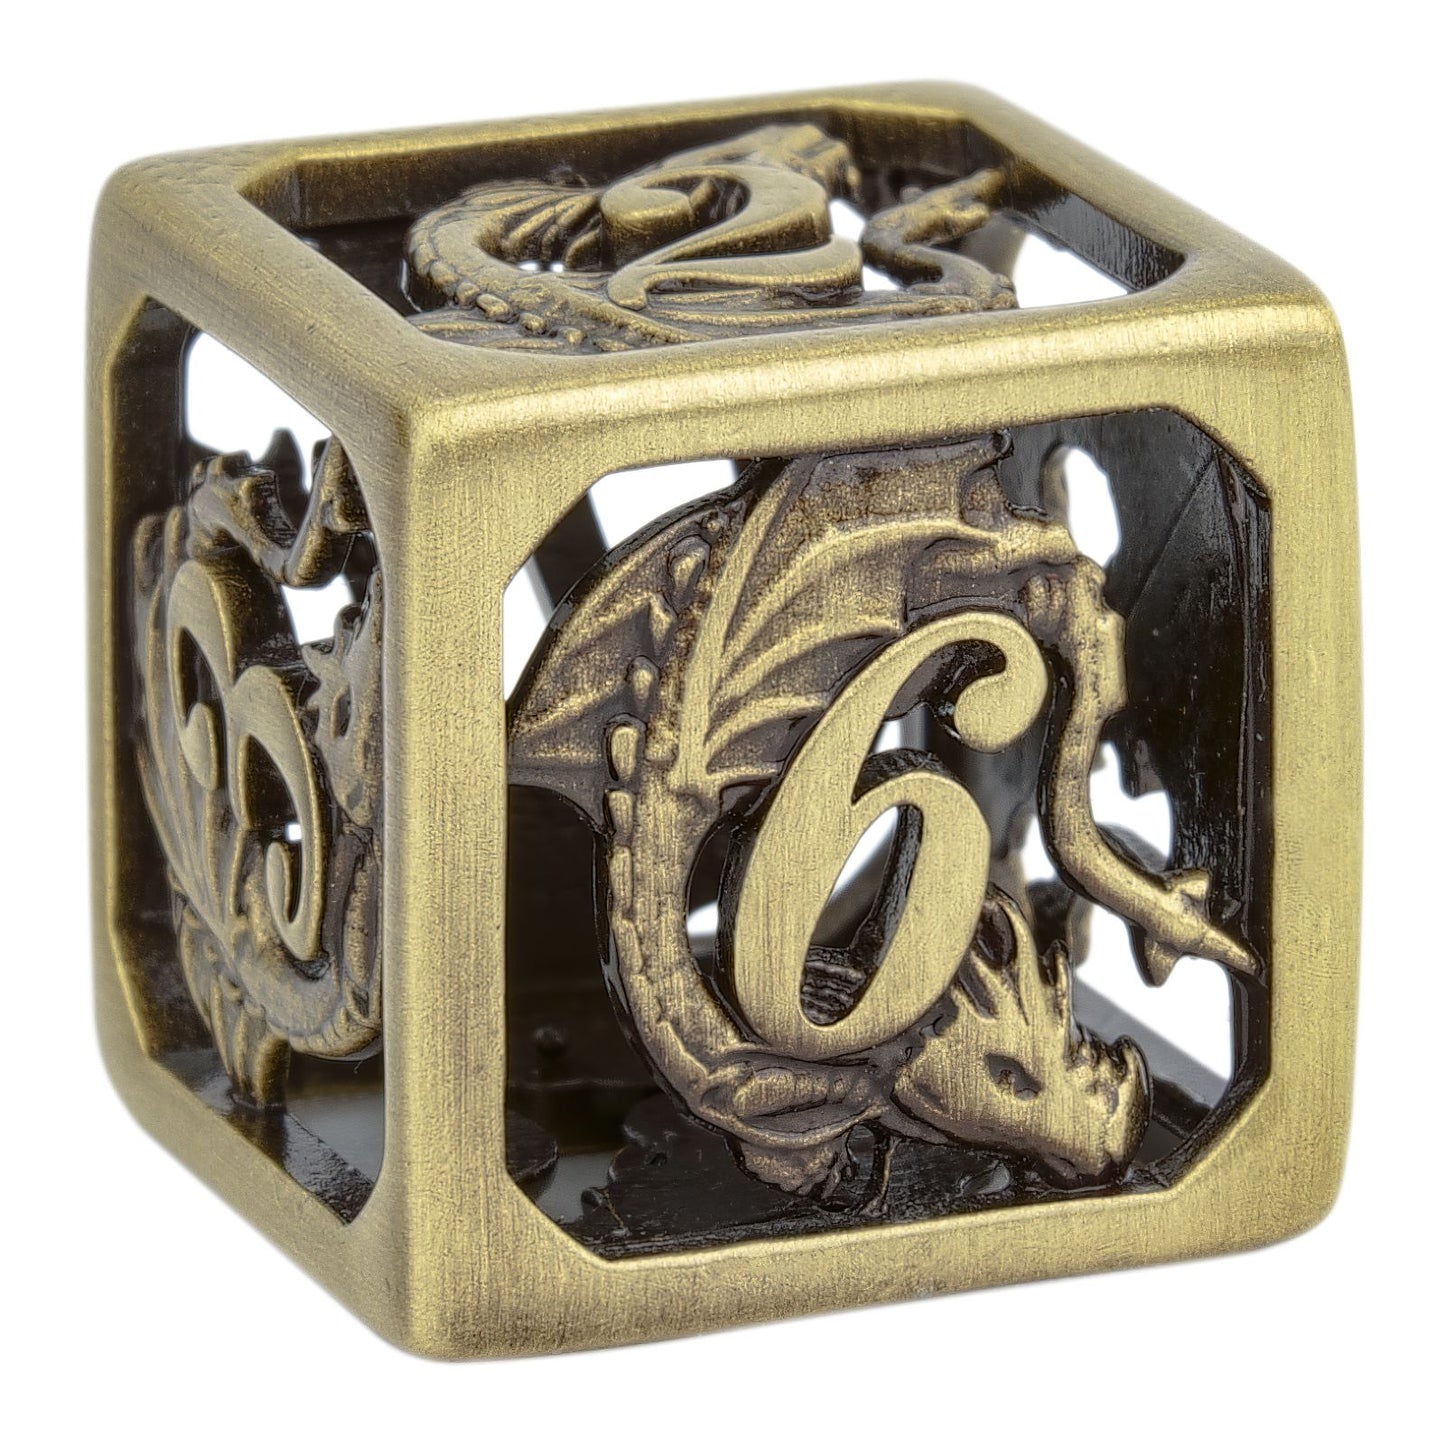 Handmade ancient old hollow dragon cage dice set for RPG games - HYMGHO Dice 